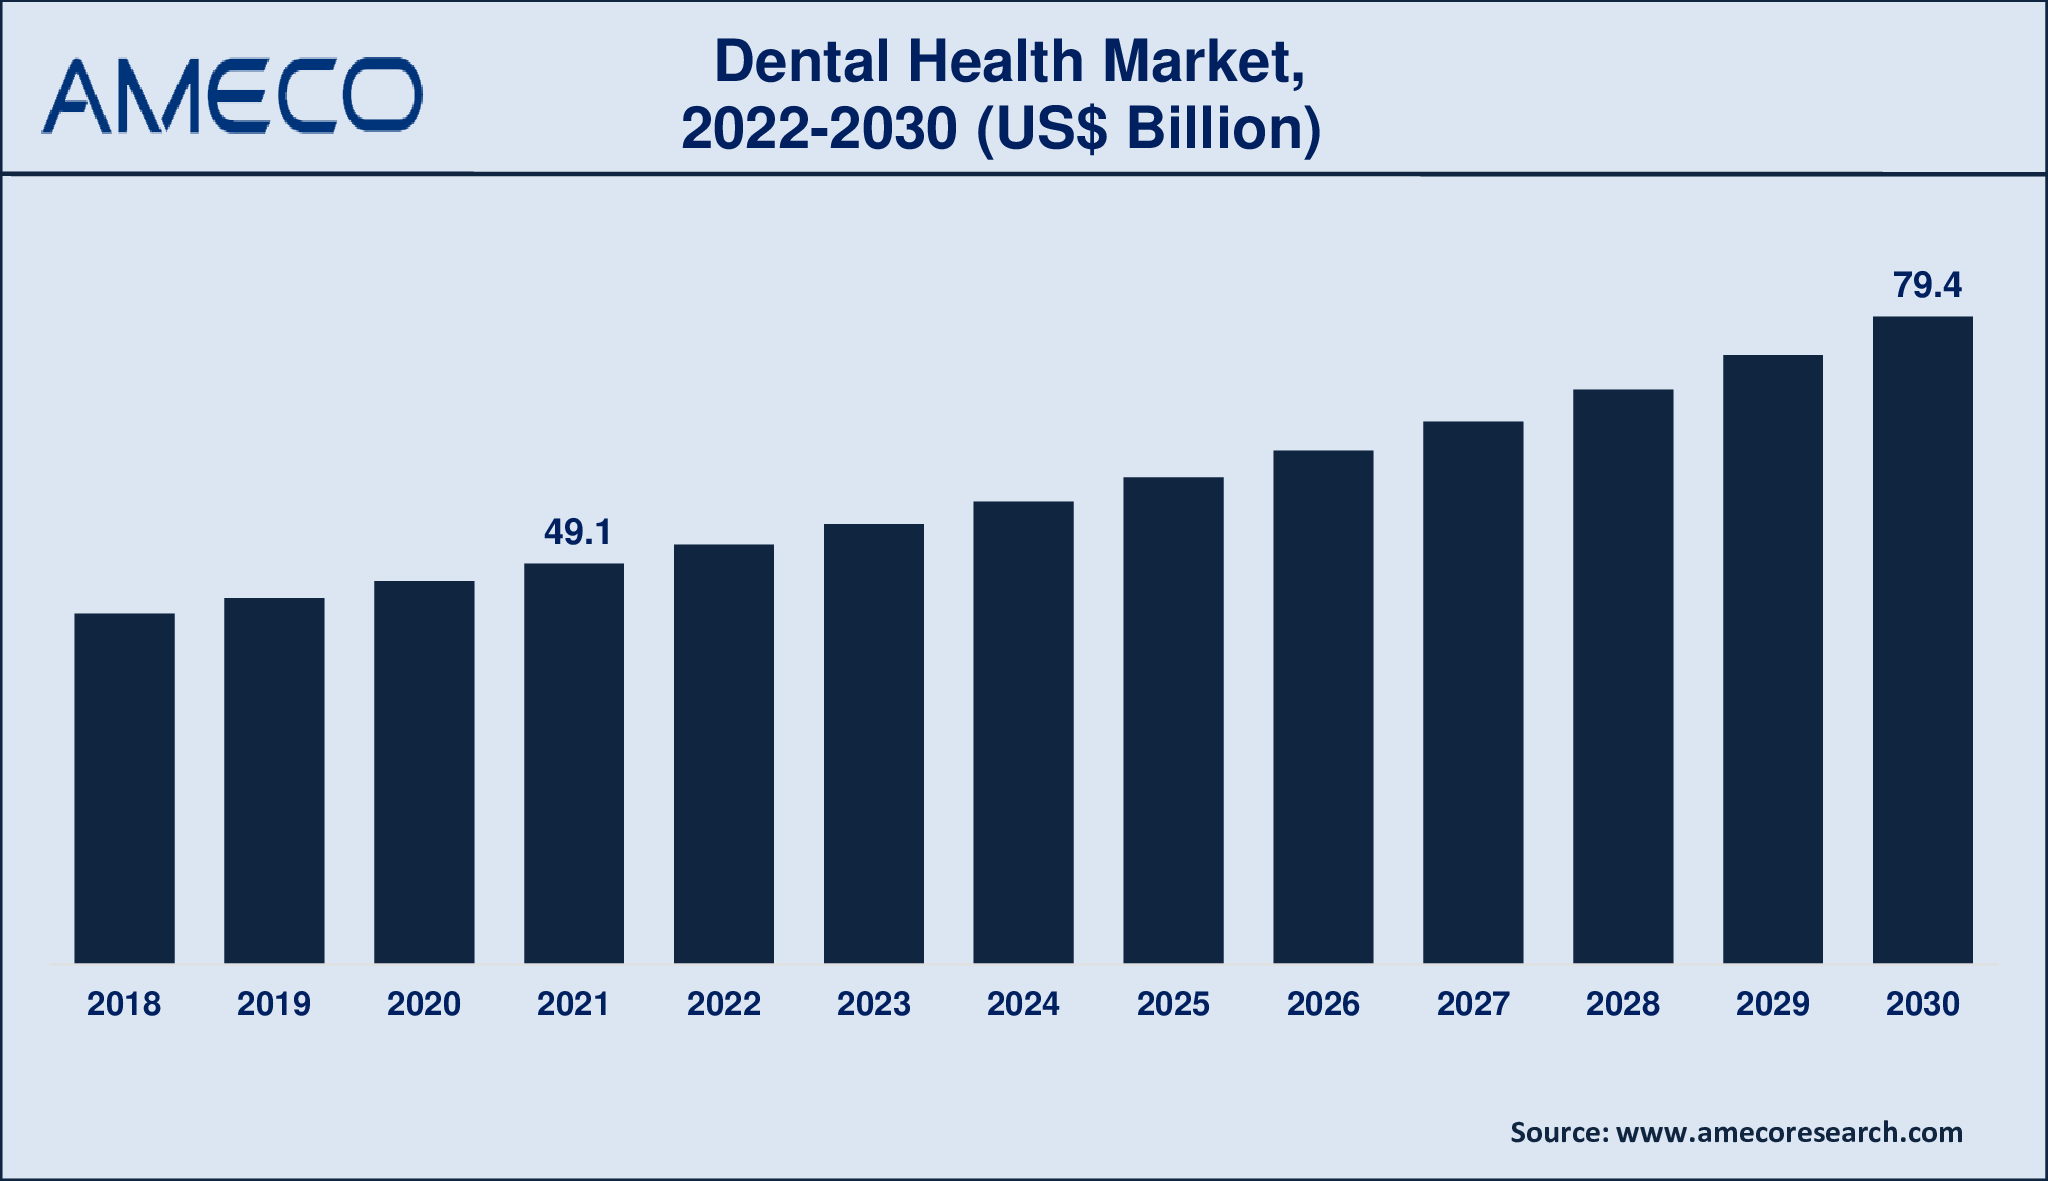 Dental Health Market Size, Share, Growth, Trends, and Forecast 2022-2030